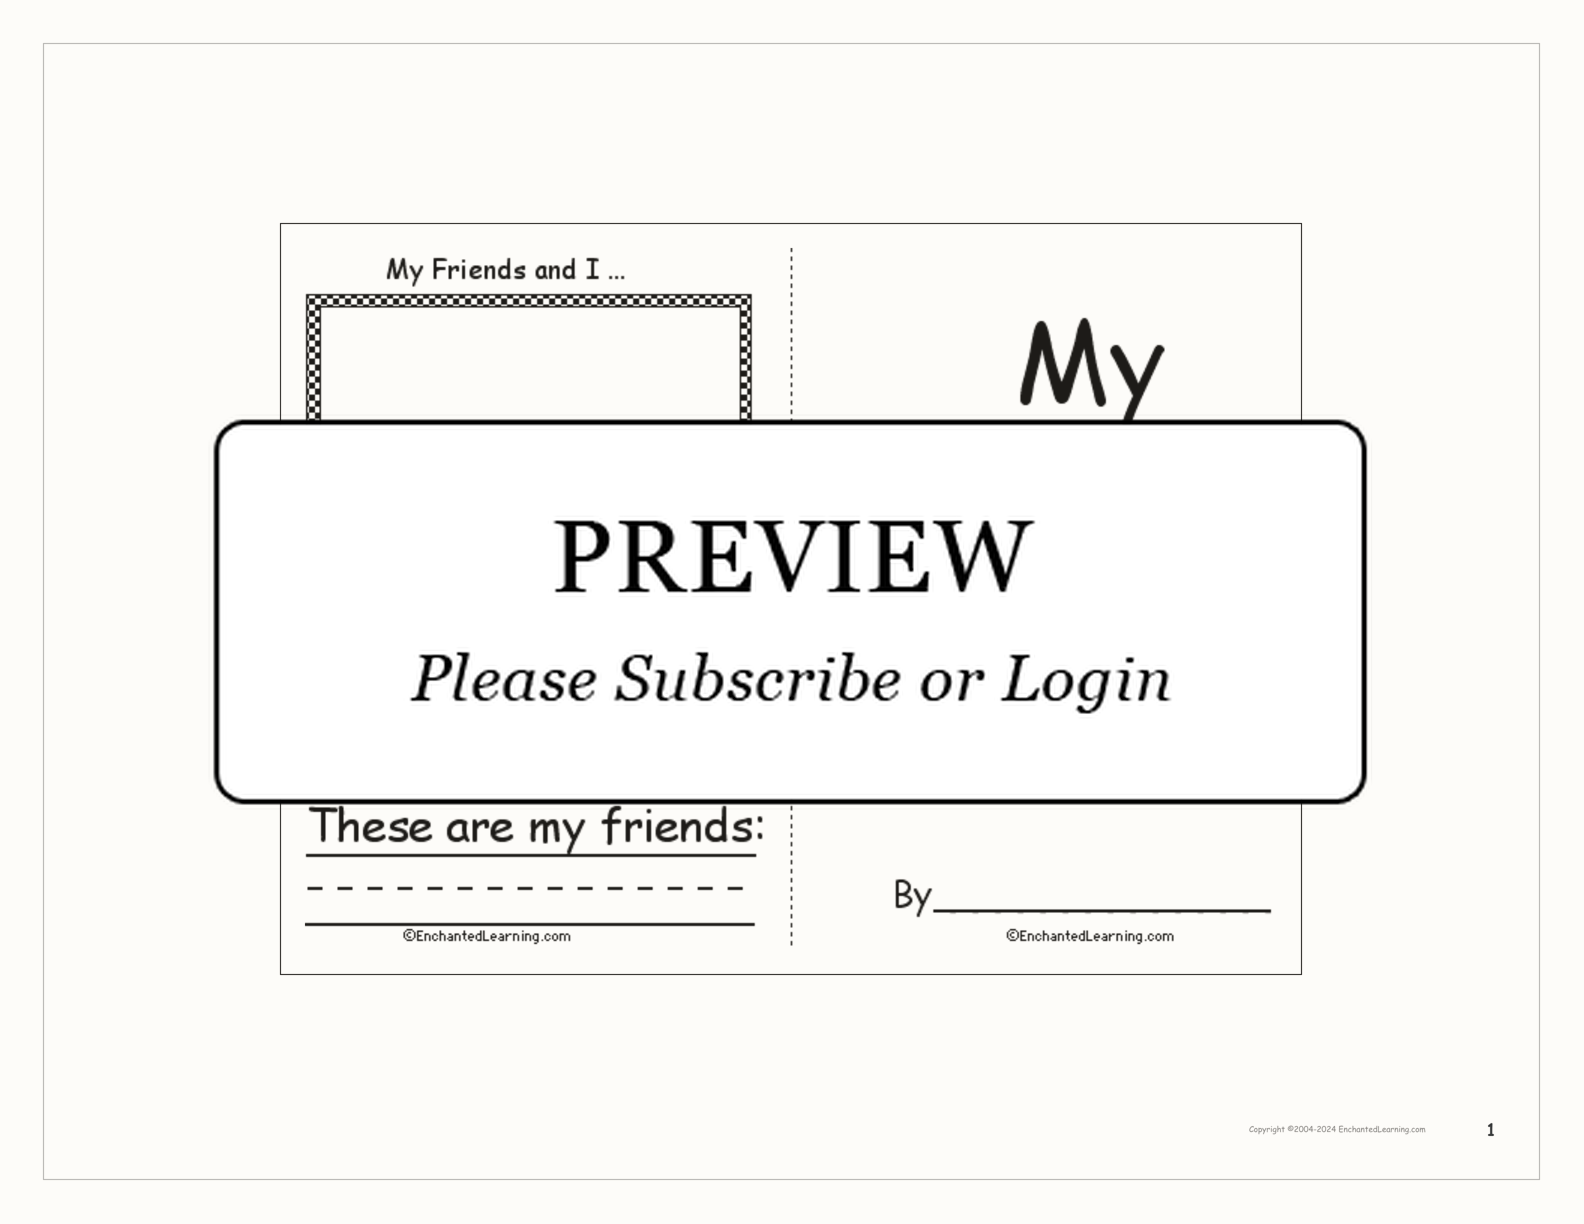 My Friends and I... Printable Book interactive printout page 1